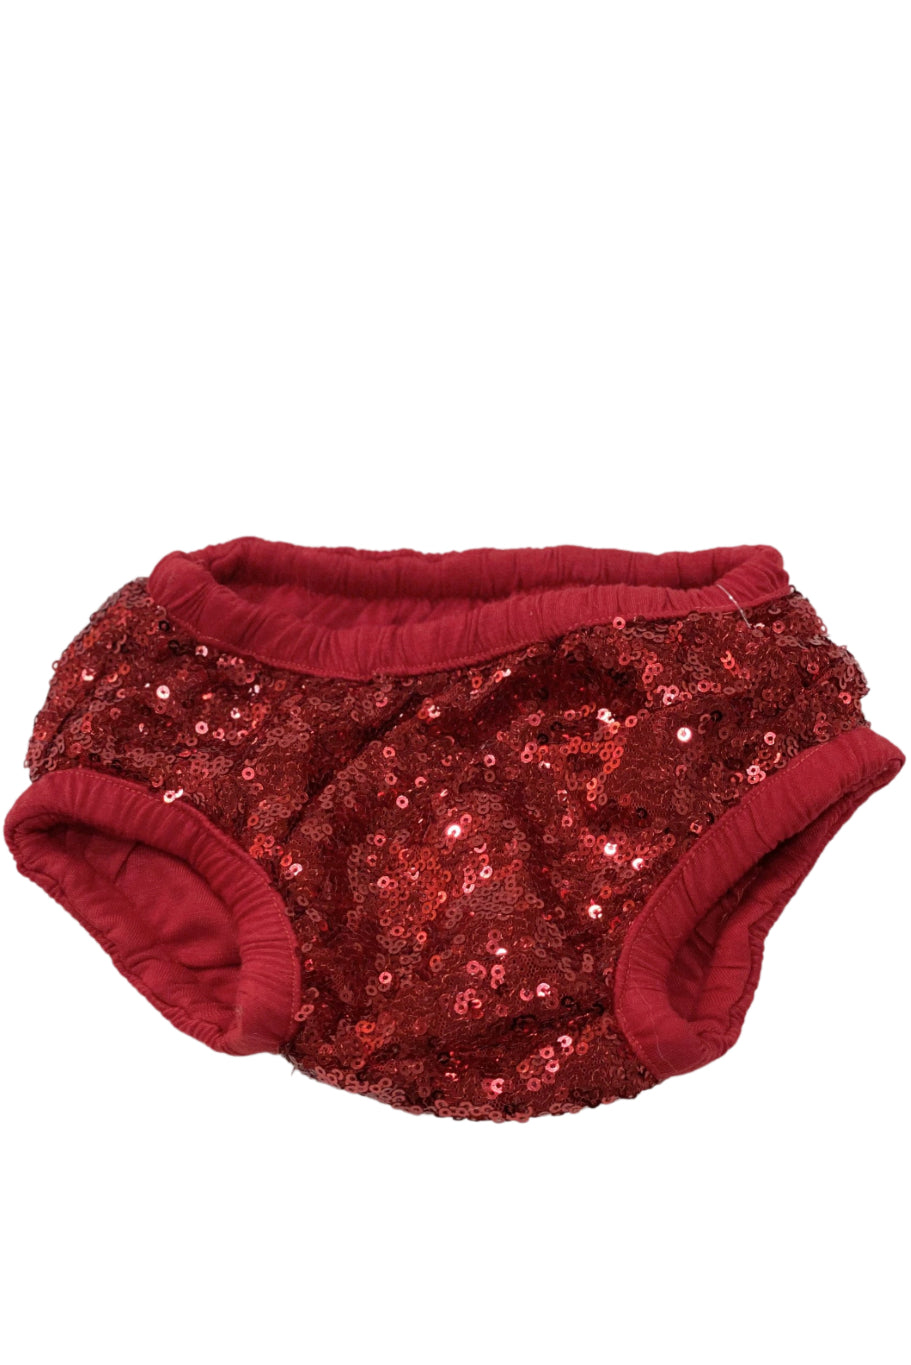 the Sequin Bloomers